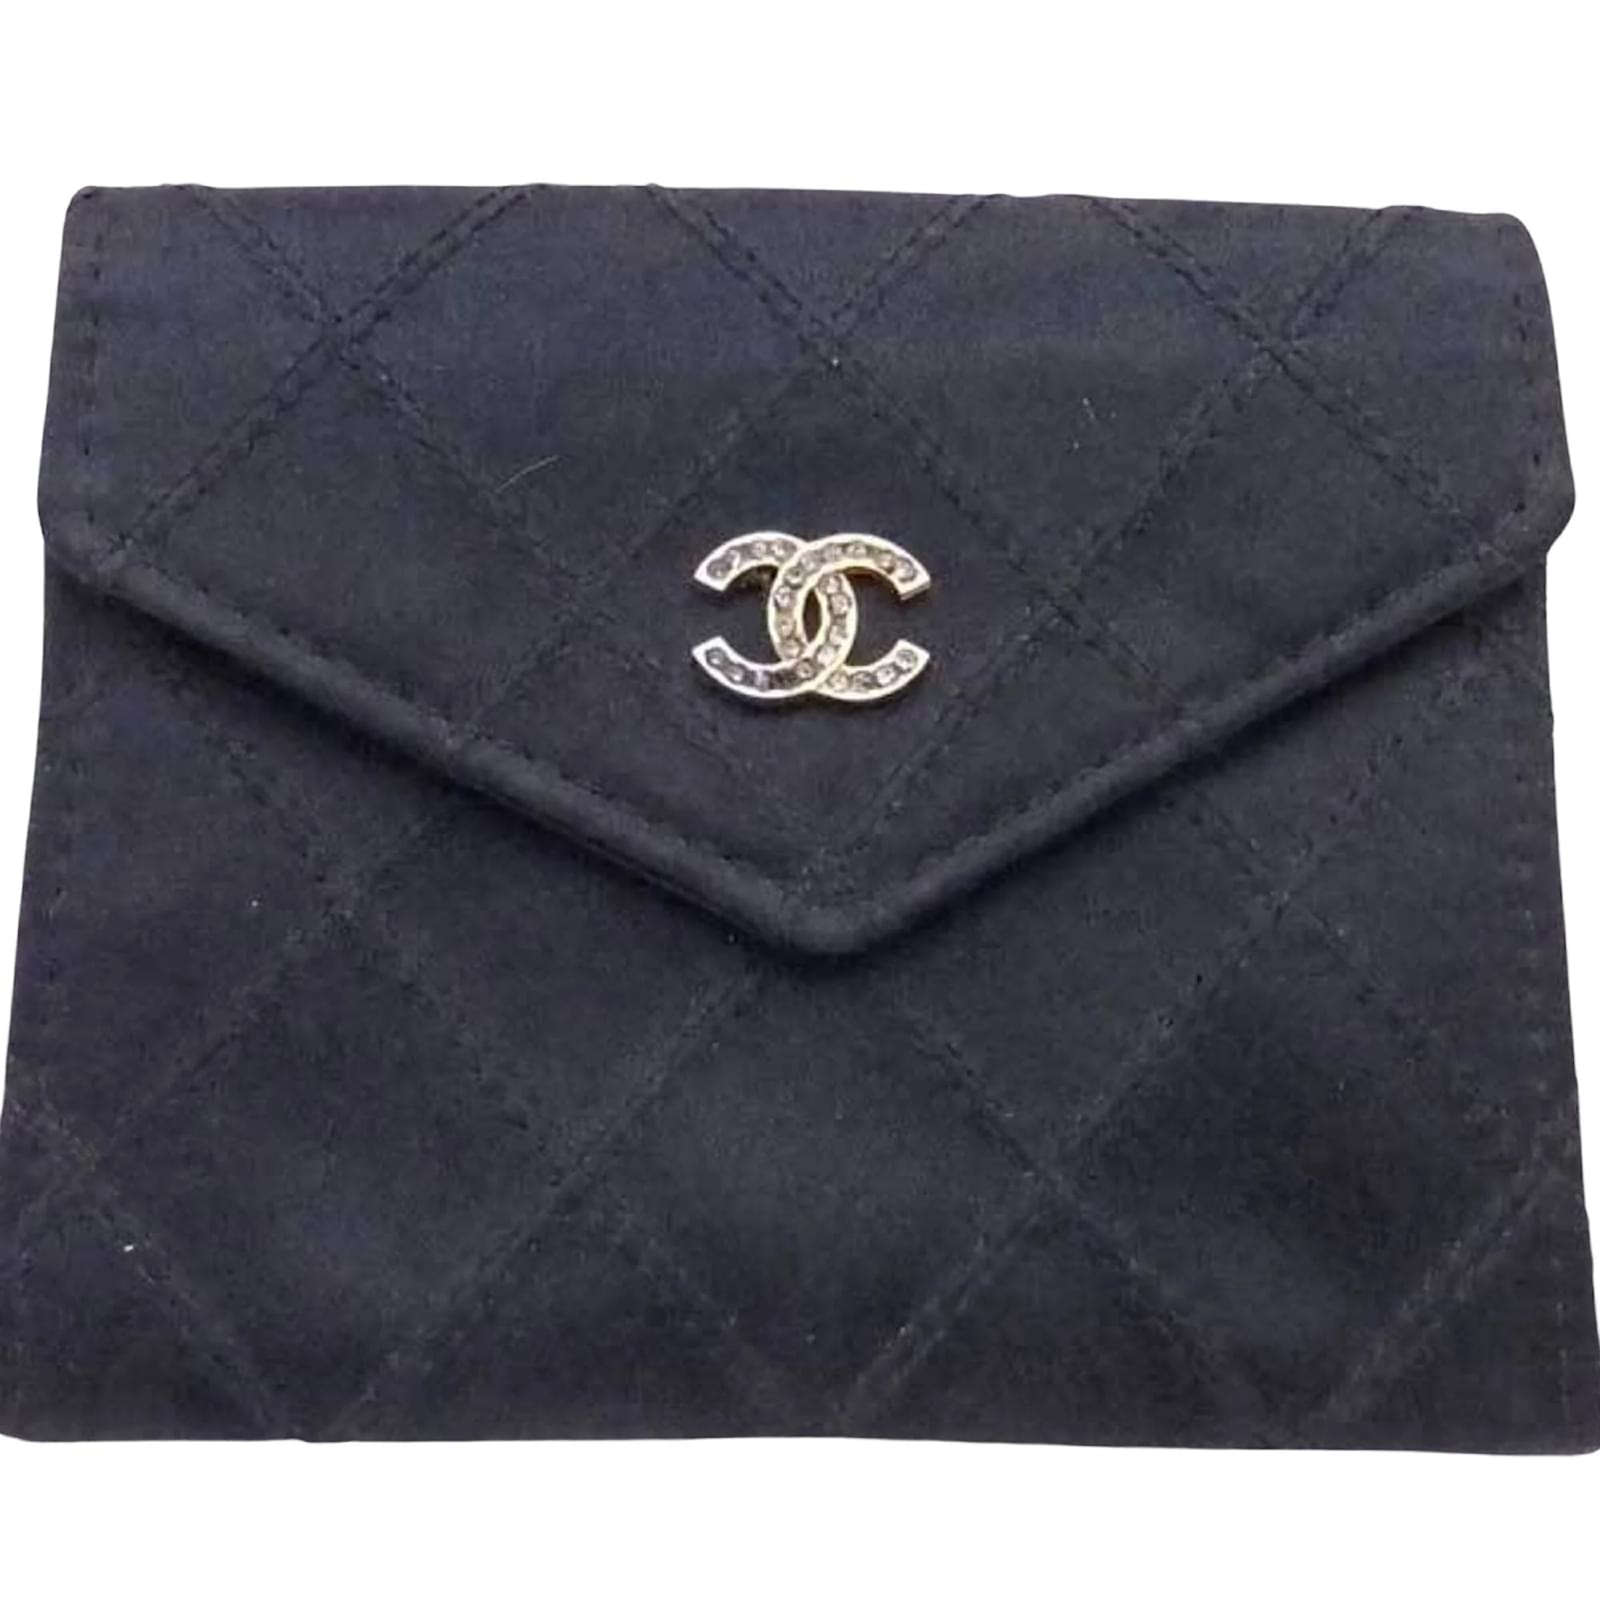 Chanel Pre-owned CC Diamond-Quilted Coin Purse